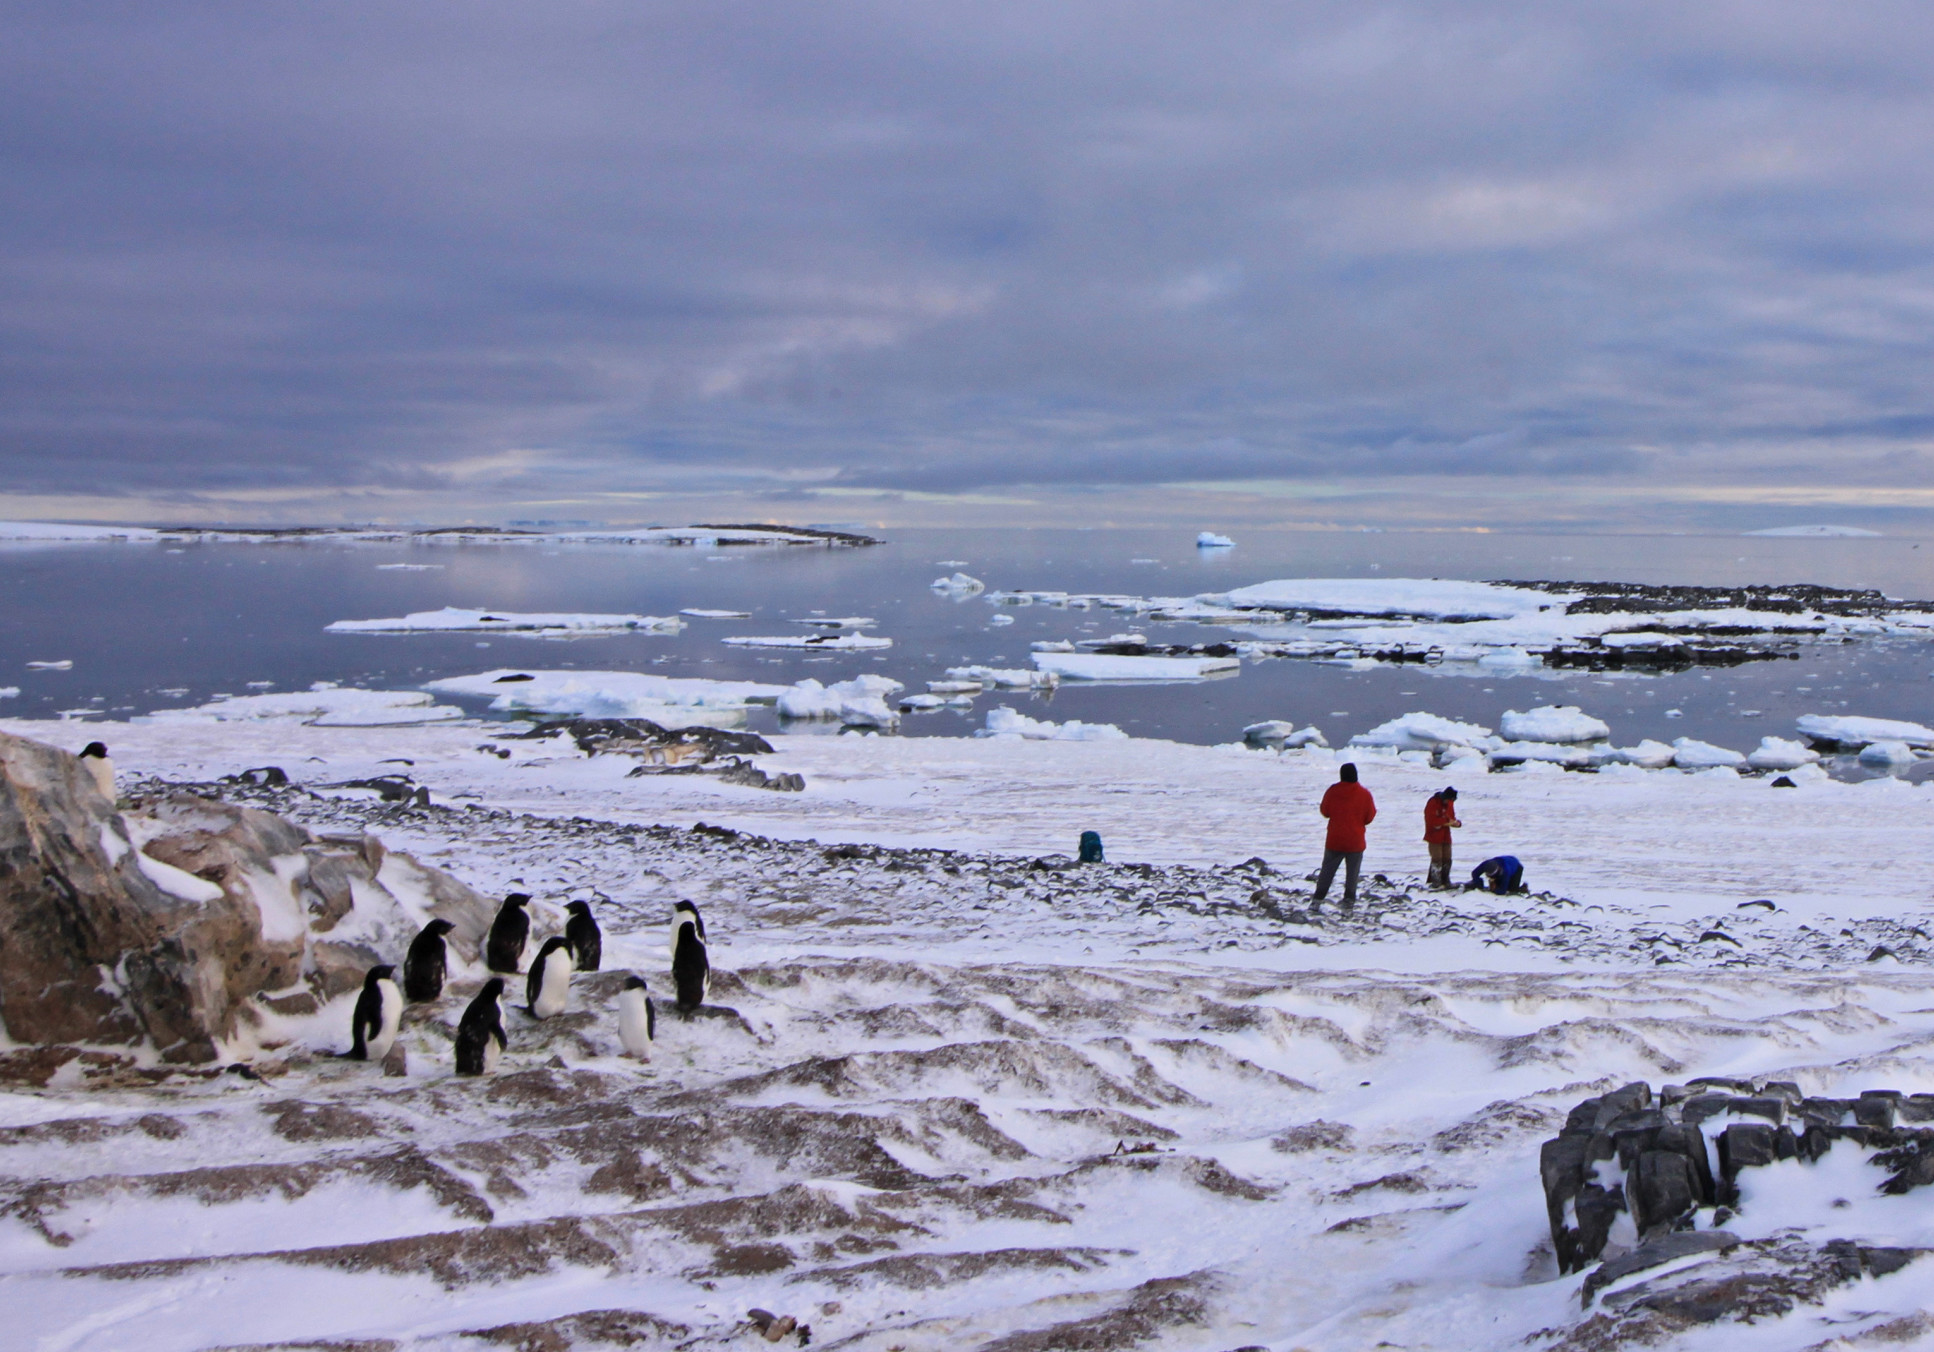 Photo of researchers on an Edwards Island beach collecting samples, watched over by a group of penguins